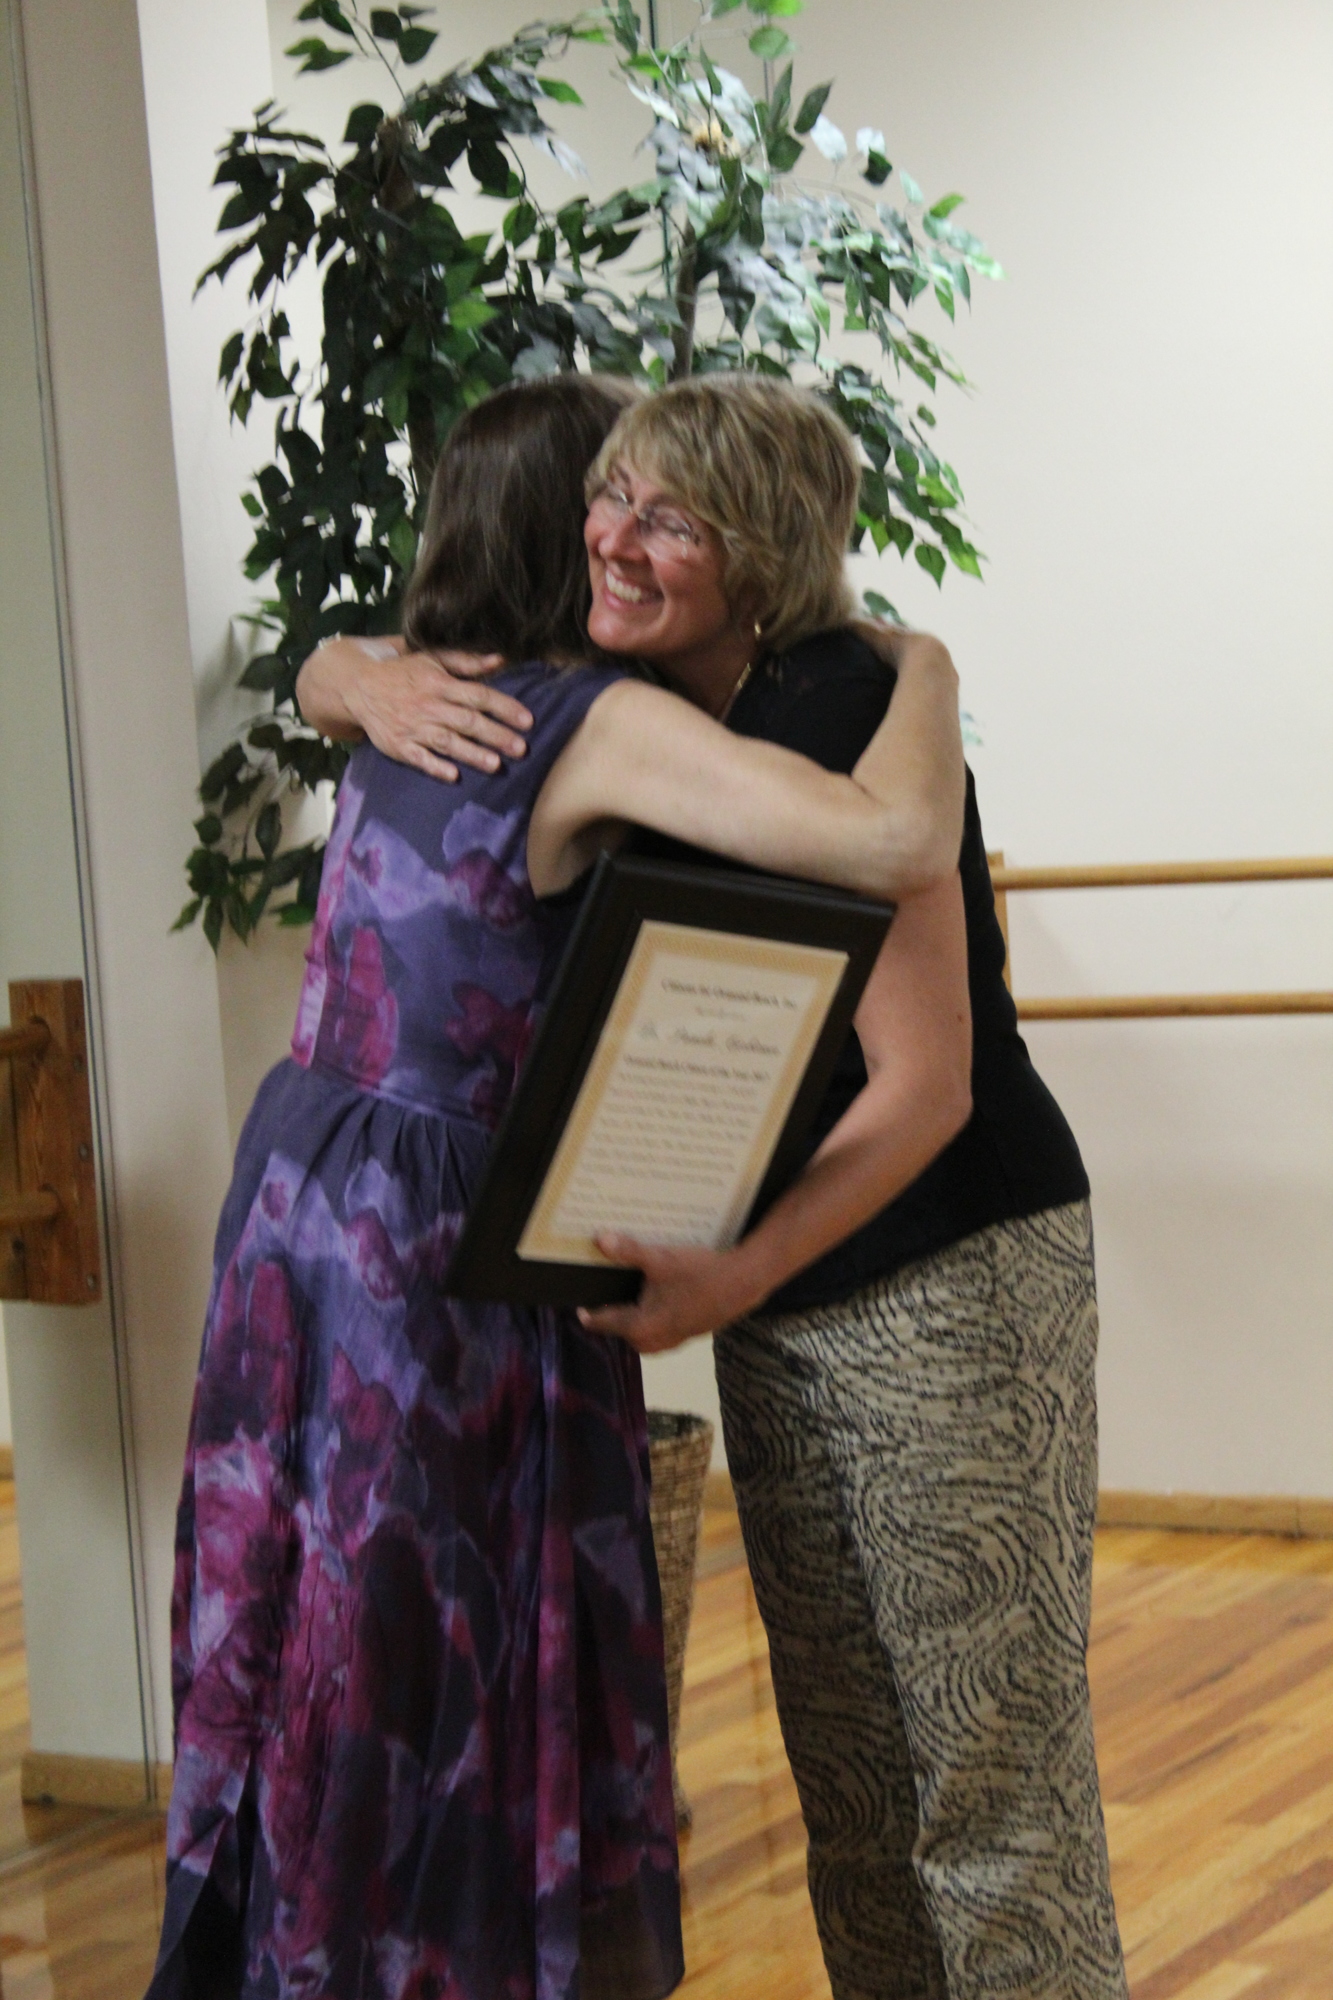 Krista Boehm and Dr. Pamela Carbiener embrace during the Citizens for Ormond Beach's membership dinner on Wednesday, Oct. 11. Photo by Jarleene Almenas